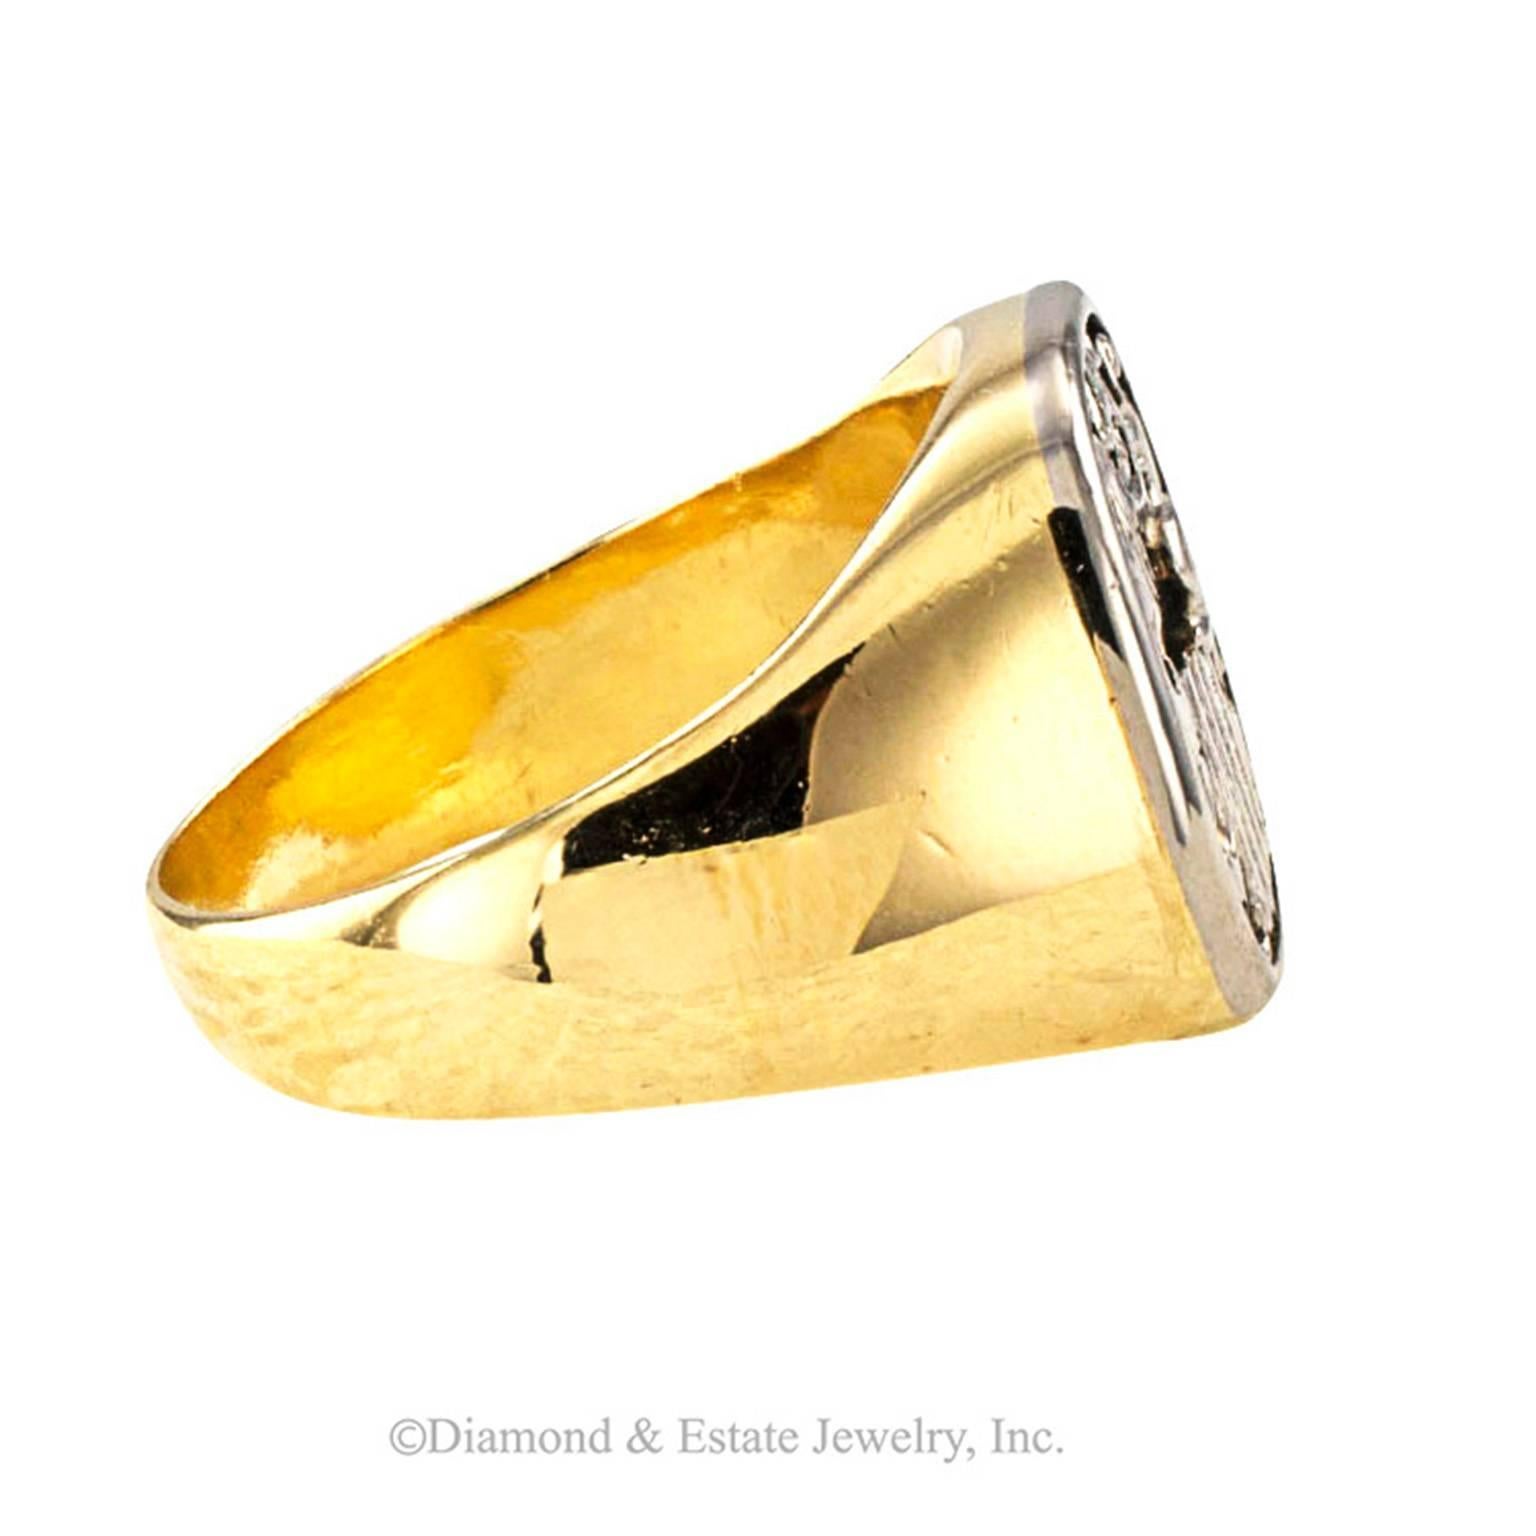  Two-tone Gold Crest Ring

Outstandingly handsome, this mid century crest ring makes a bold statement... classic and refined masculine elegance.  Two-tone 18 karat gold.
RING SIZE:  11 1/4, a jeweler can size it.
 Approximately 11/16" long